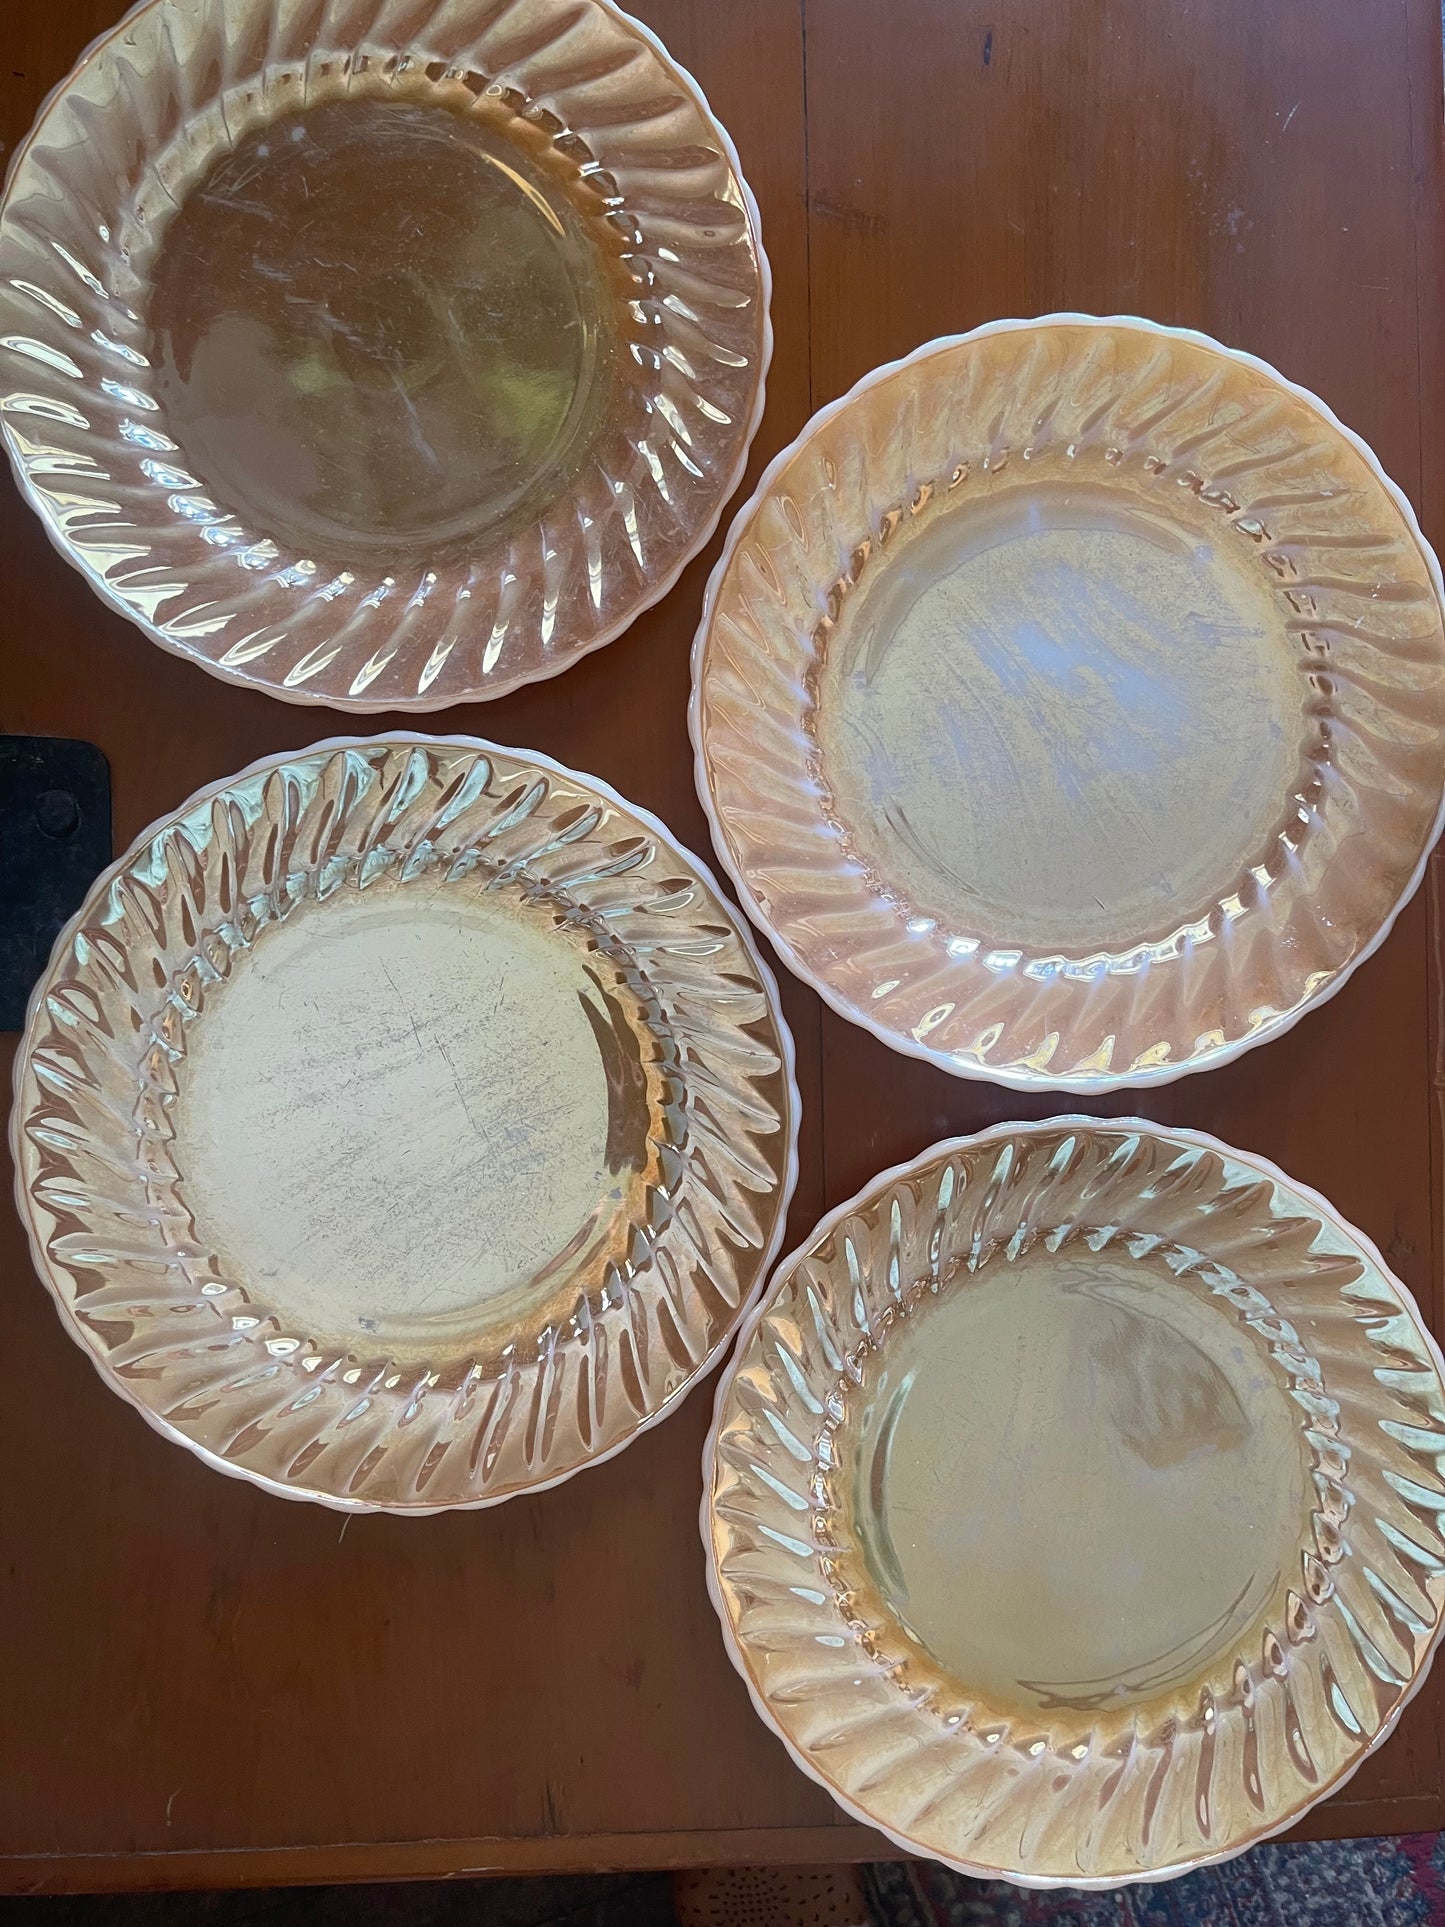 Anchor Hocking Fire King Peach Lustre Set of Four dinner Plates